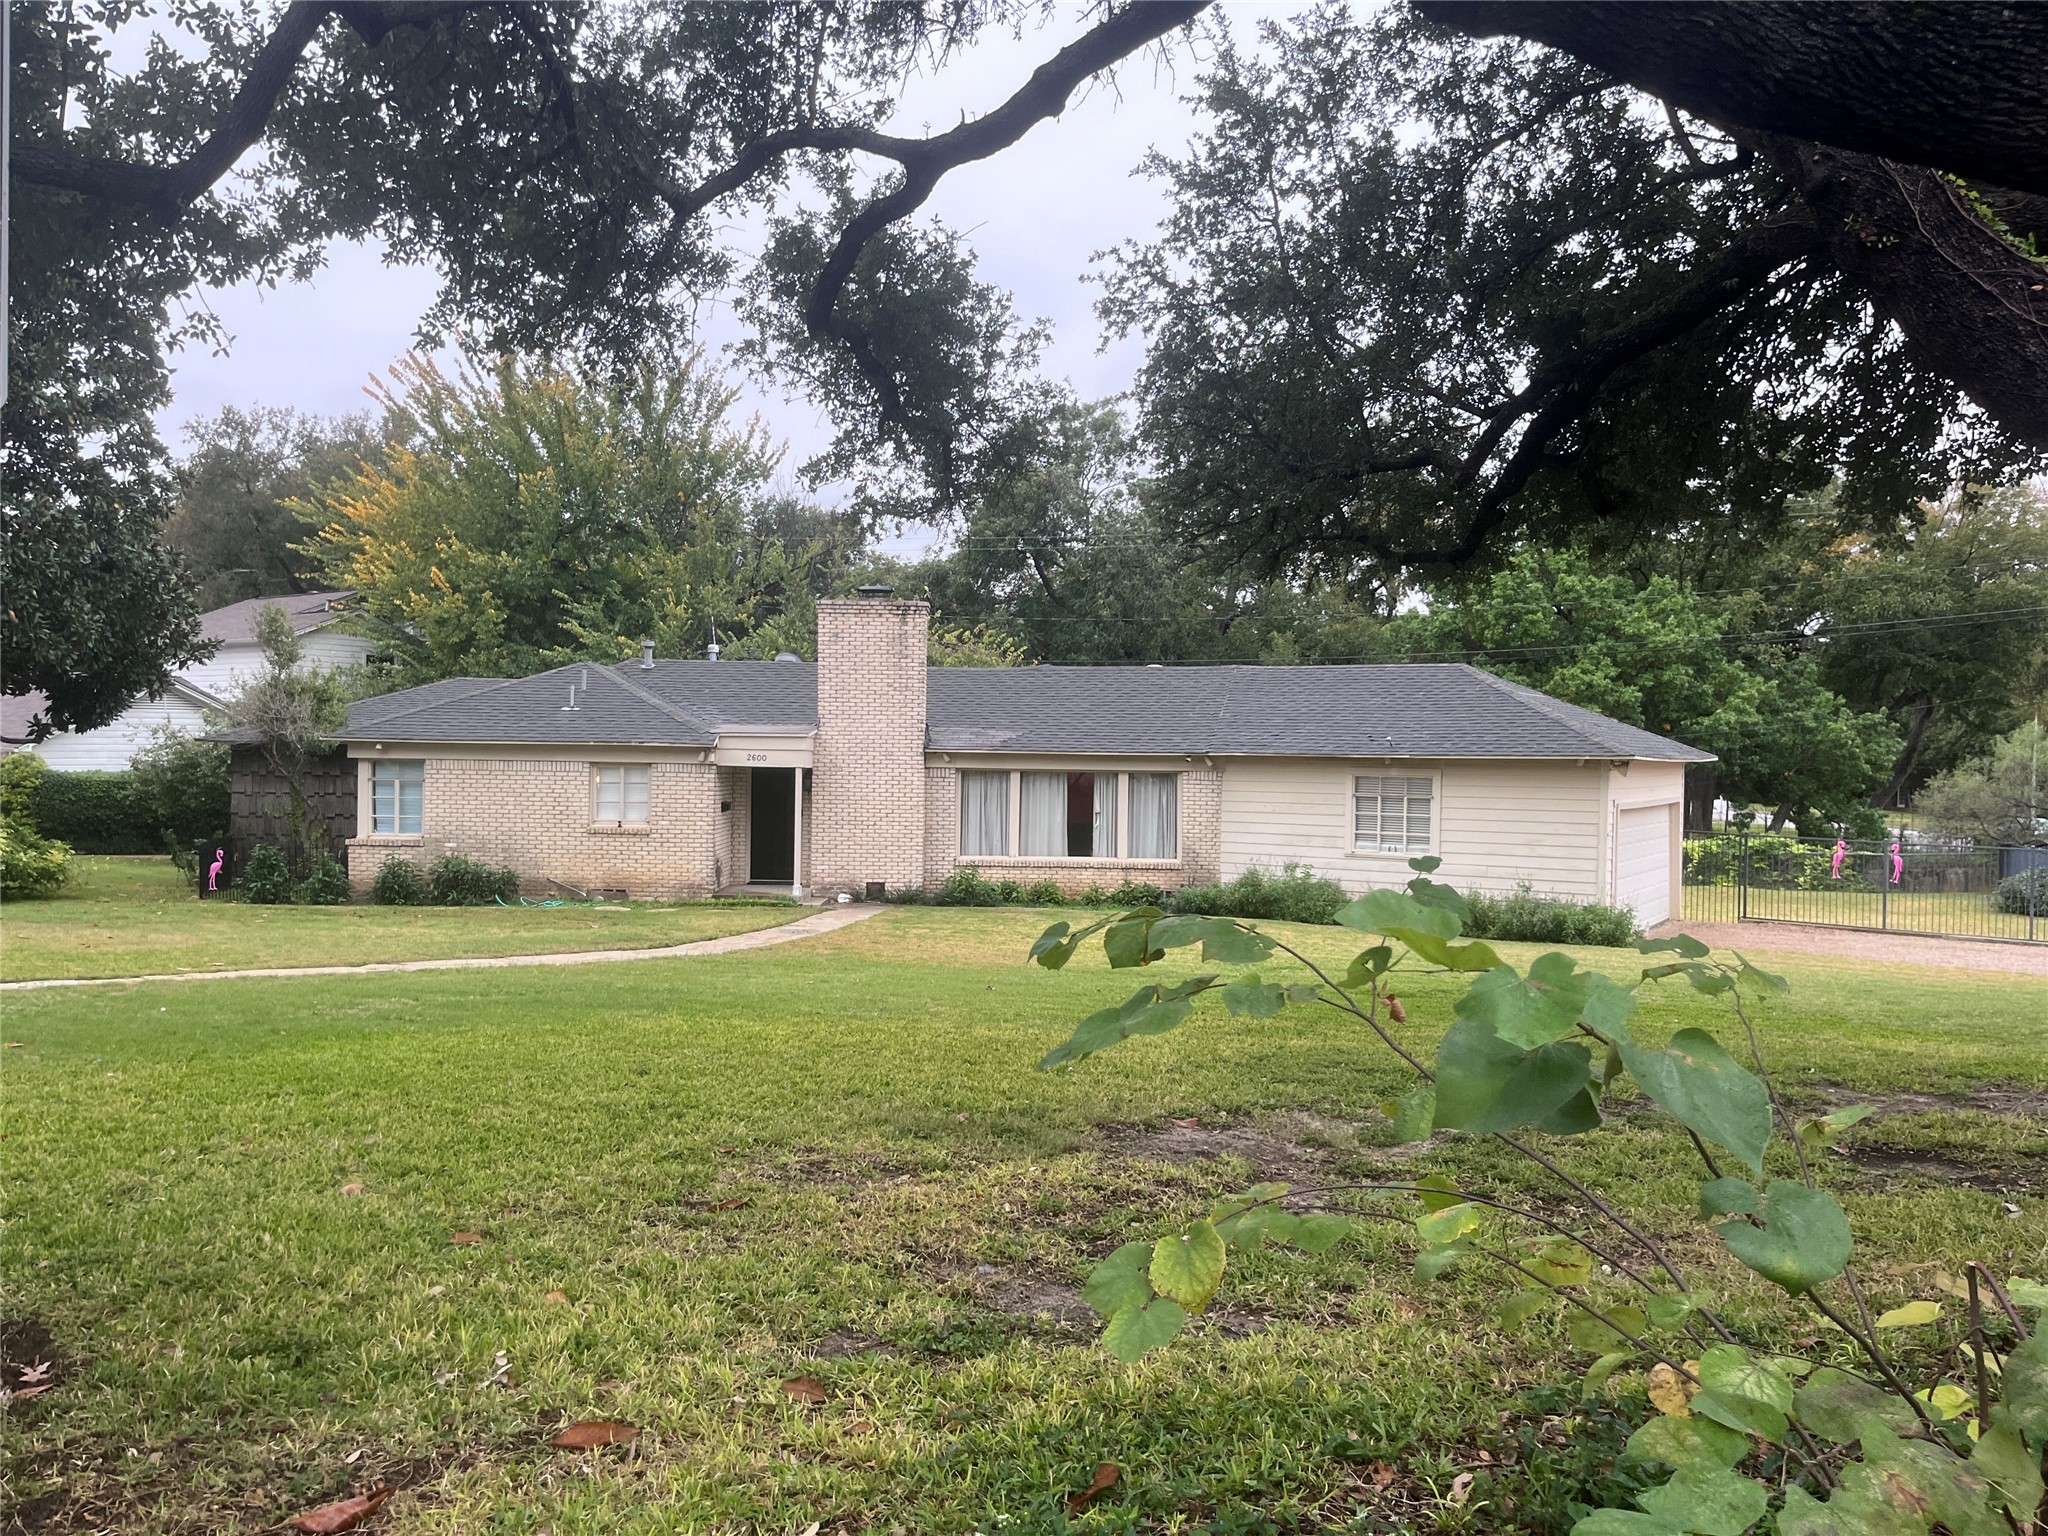 2600 COLONIAL PARKWAY, FORT WORTH, TX 76109 